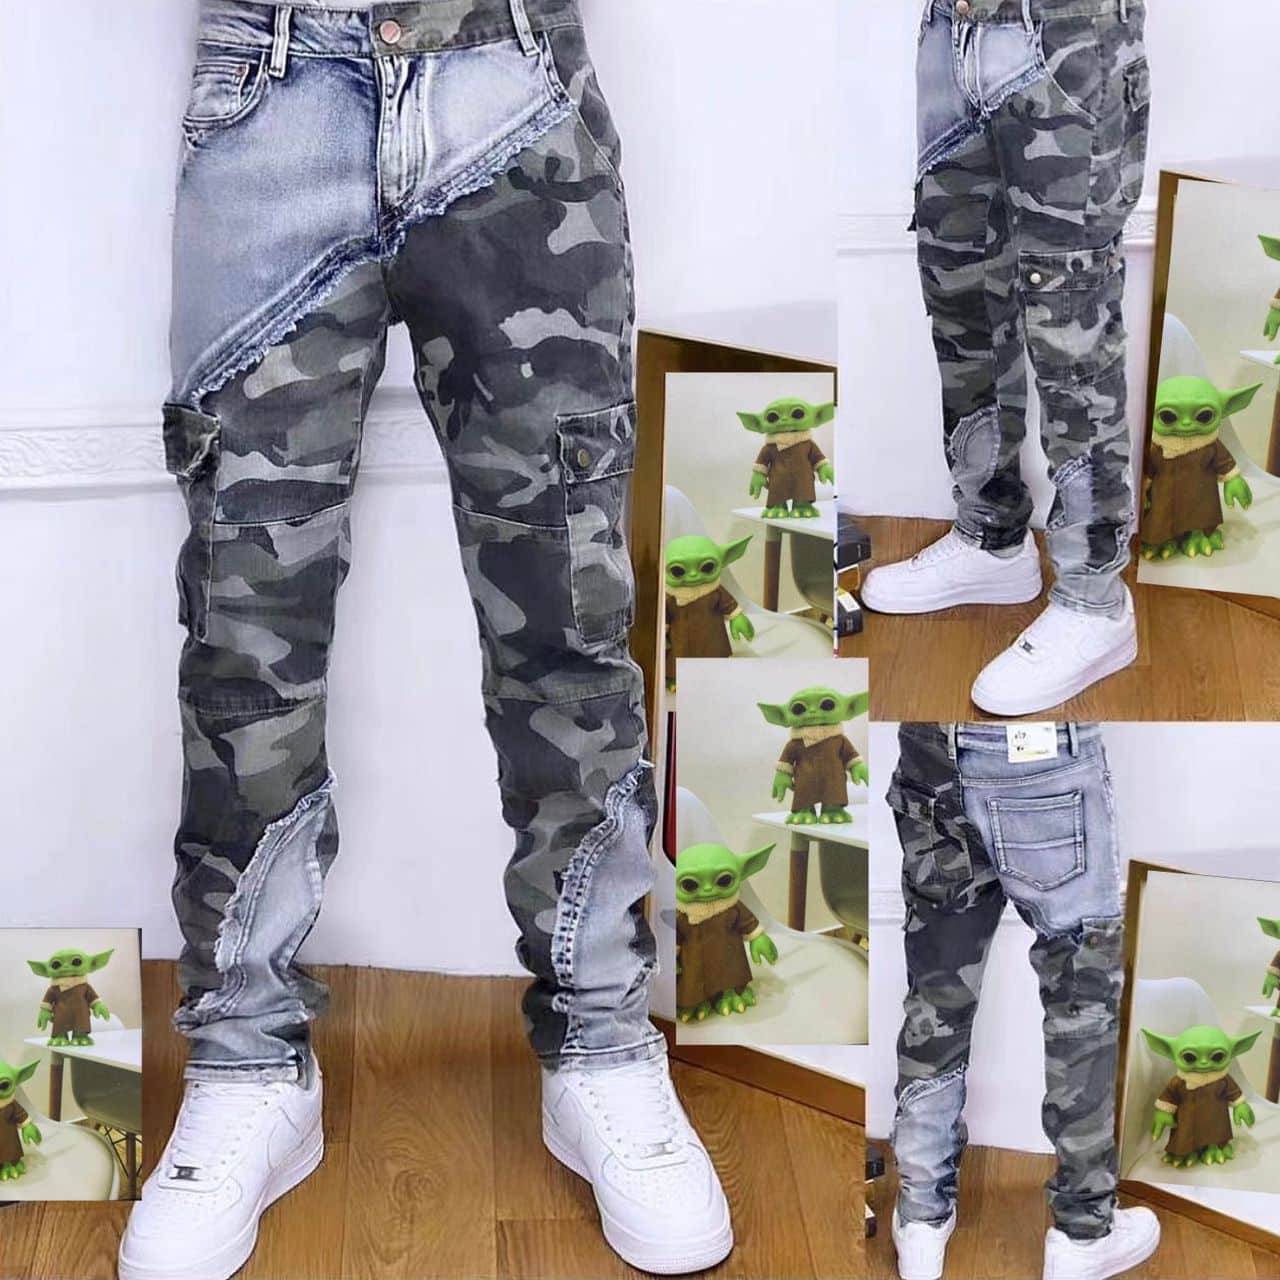 FASHION CAMO STREETWEAR JEANS TROUSERS for CartRollers Marketplace For Shopping Online, Fashion, Electronics, Phones, Computers and Buy Men Shoe, Home Appliances, Kitchen-wares, Groceries Accessories,ankara, Aso Ebi, Beads, Boys Casual Wears, Children Children's Wears ,Corporate Shoes, Cosmetics Dress ,Dresses Fashion, Girls' Dresses ,Girls' Wears, Hair Care ,Jewelries ,Jewelry Kids, Kids' Fashion Ladies ,Wears Lapel Pins, Loafers Shoe Men ,Men's Caftan, Men's Casual Soes, Men's Fashion, Men's Shoes, Men's Wears, Moccasin Shoe, Natural Hair, In Lagos Nigeria